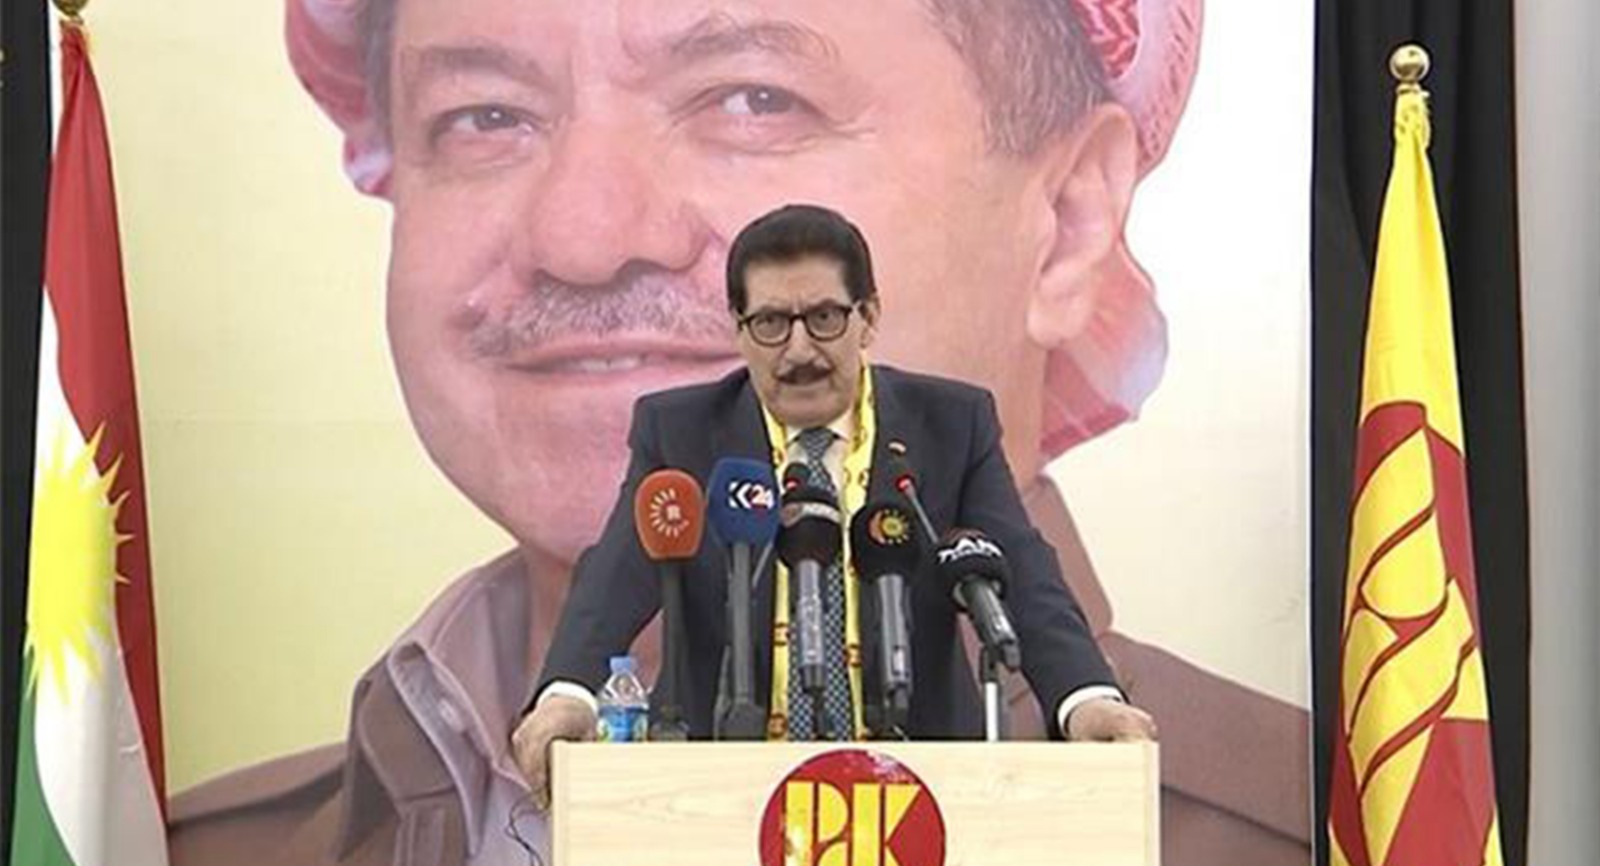 KDP leading figure calls for changing the federal court's "structure"